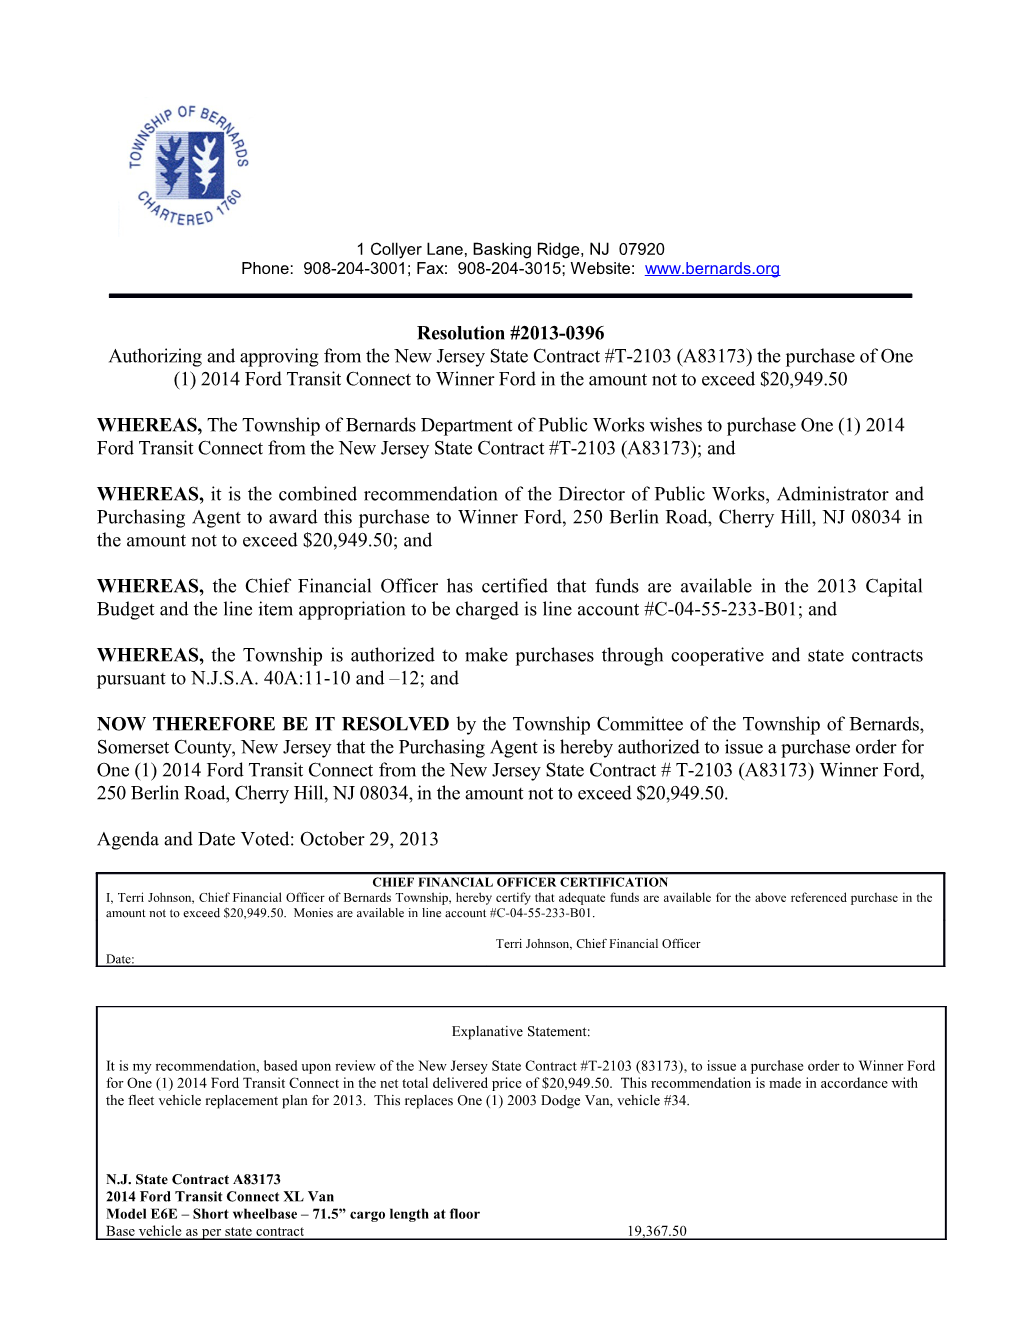 WHEREAS, the Township of Bernards Department of Public Works Wishes to Purchase One(1) 2014